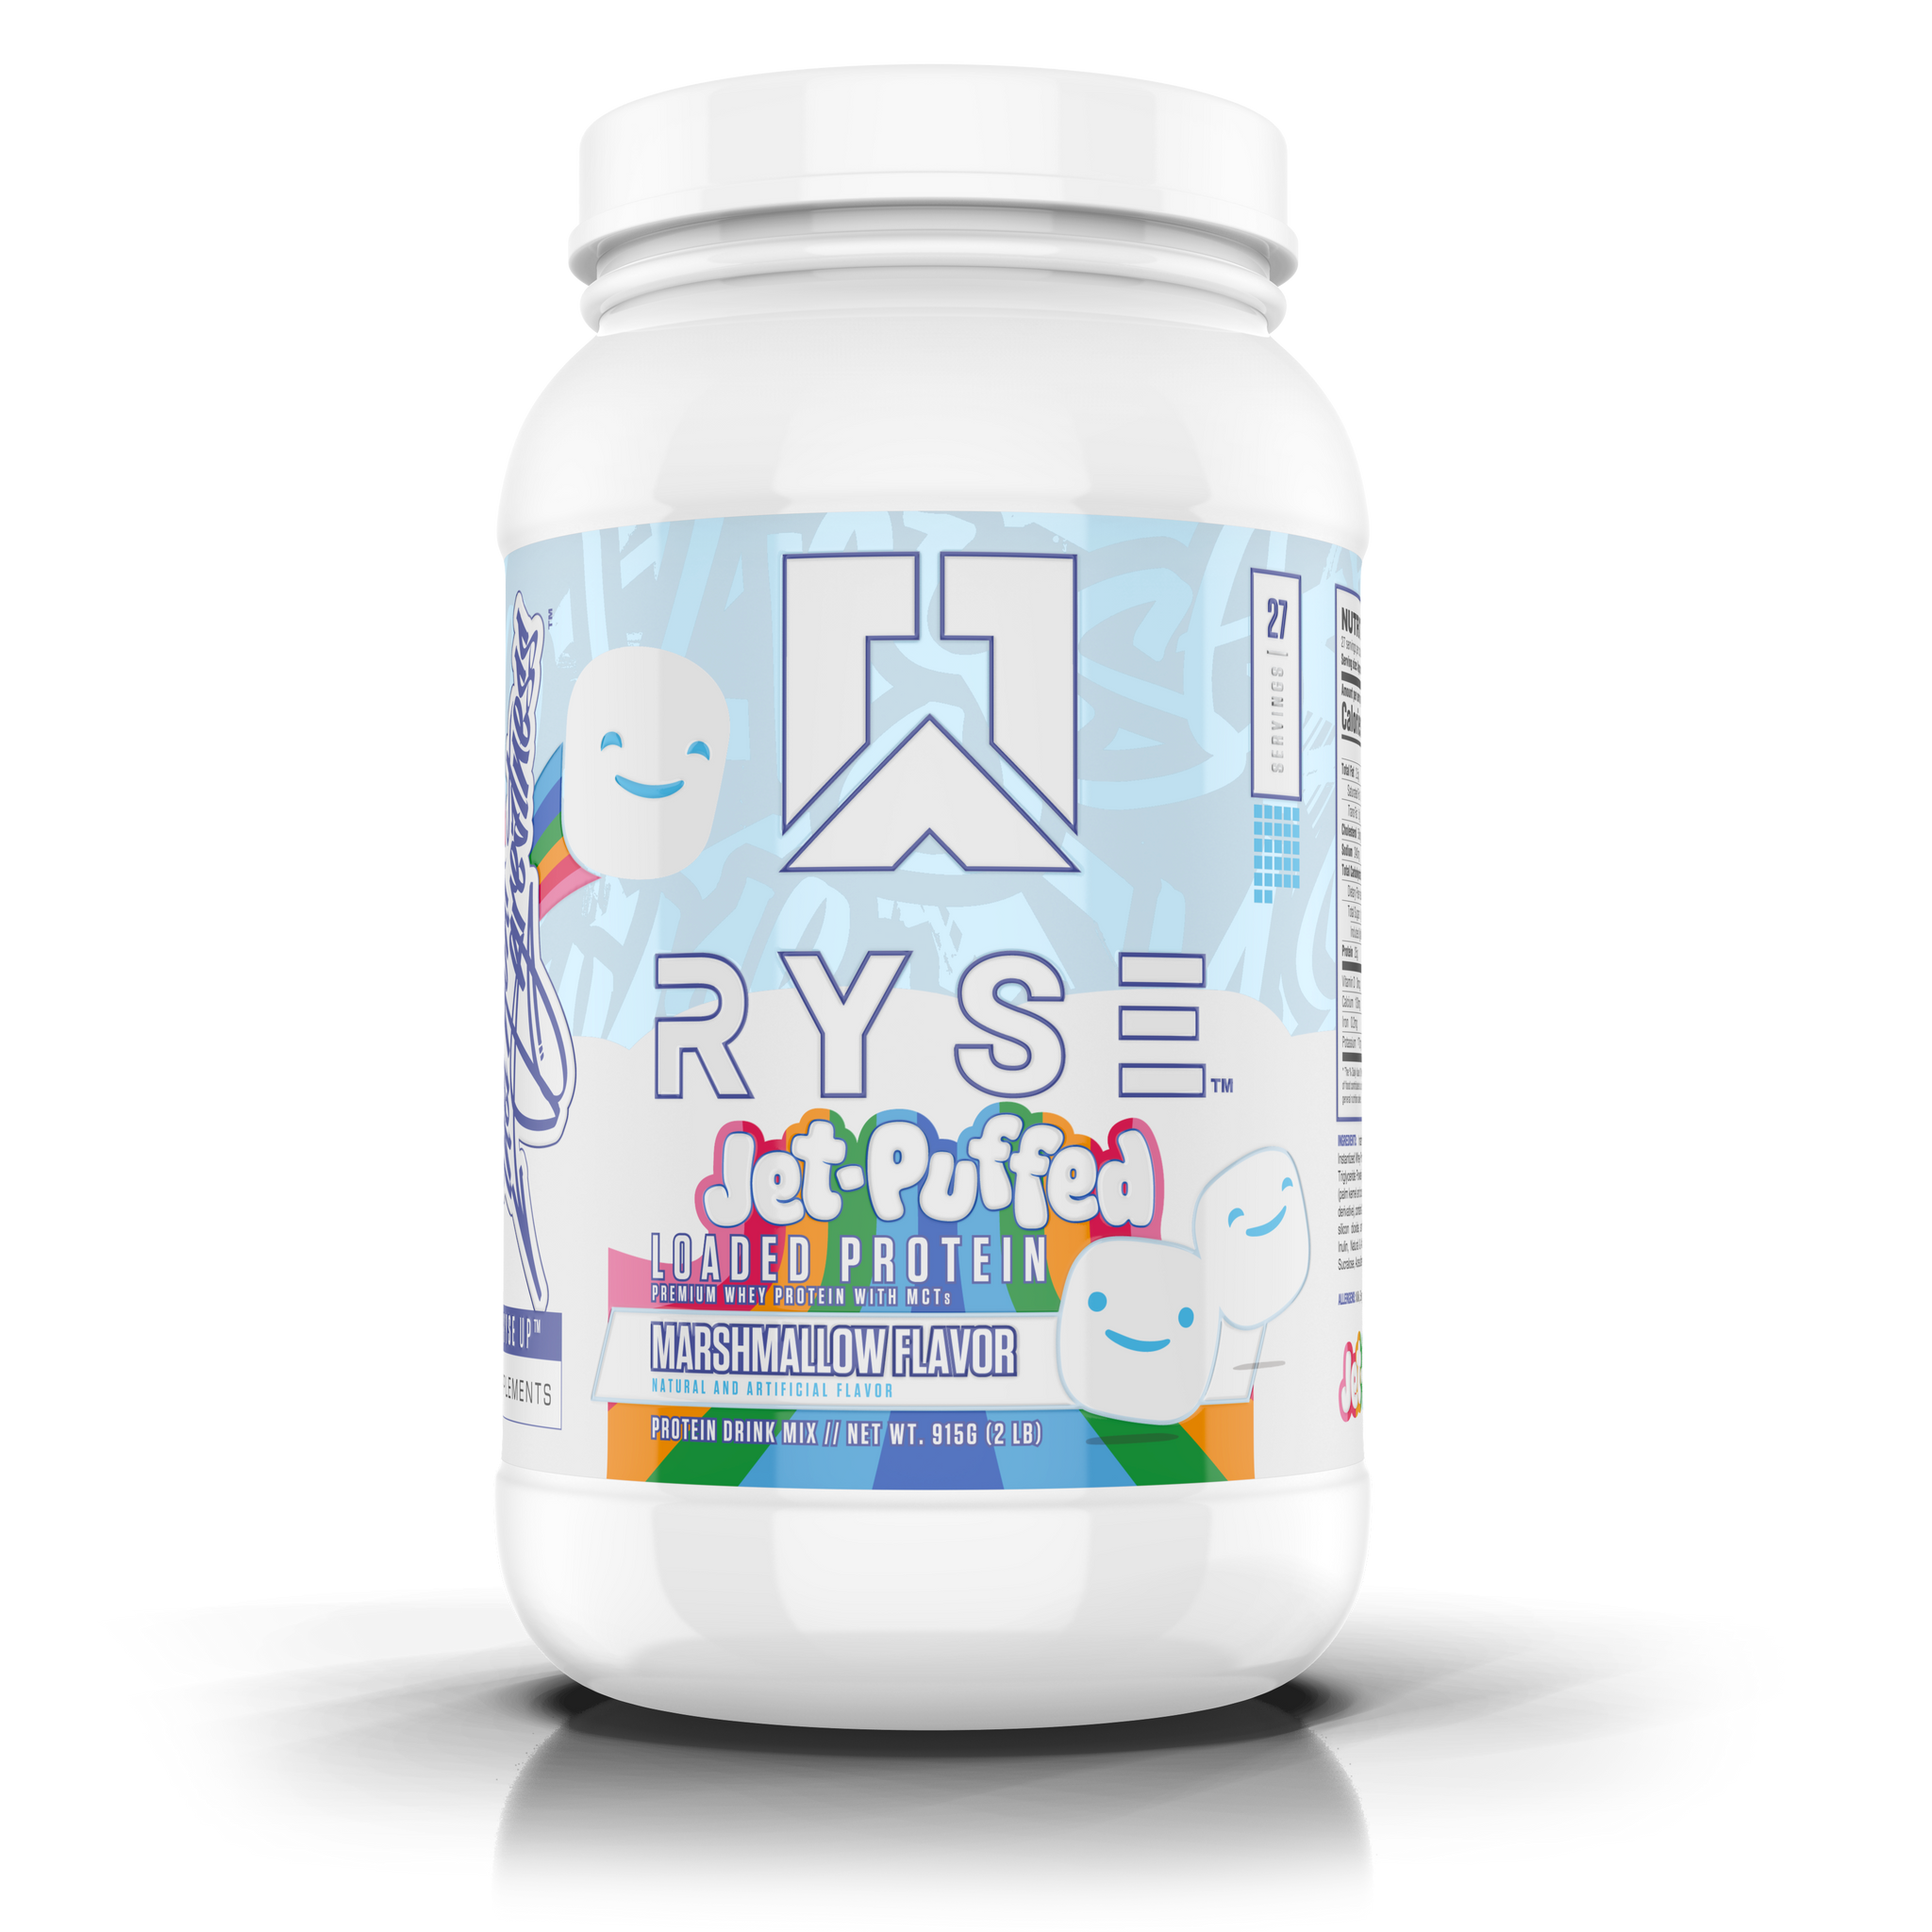 Ryse Jet-Puffed™ LOADED PROTEIN - Marshmallow